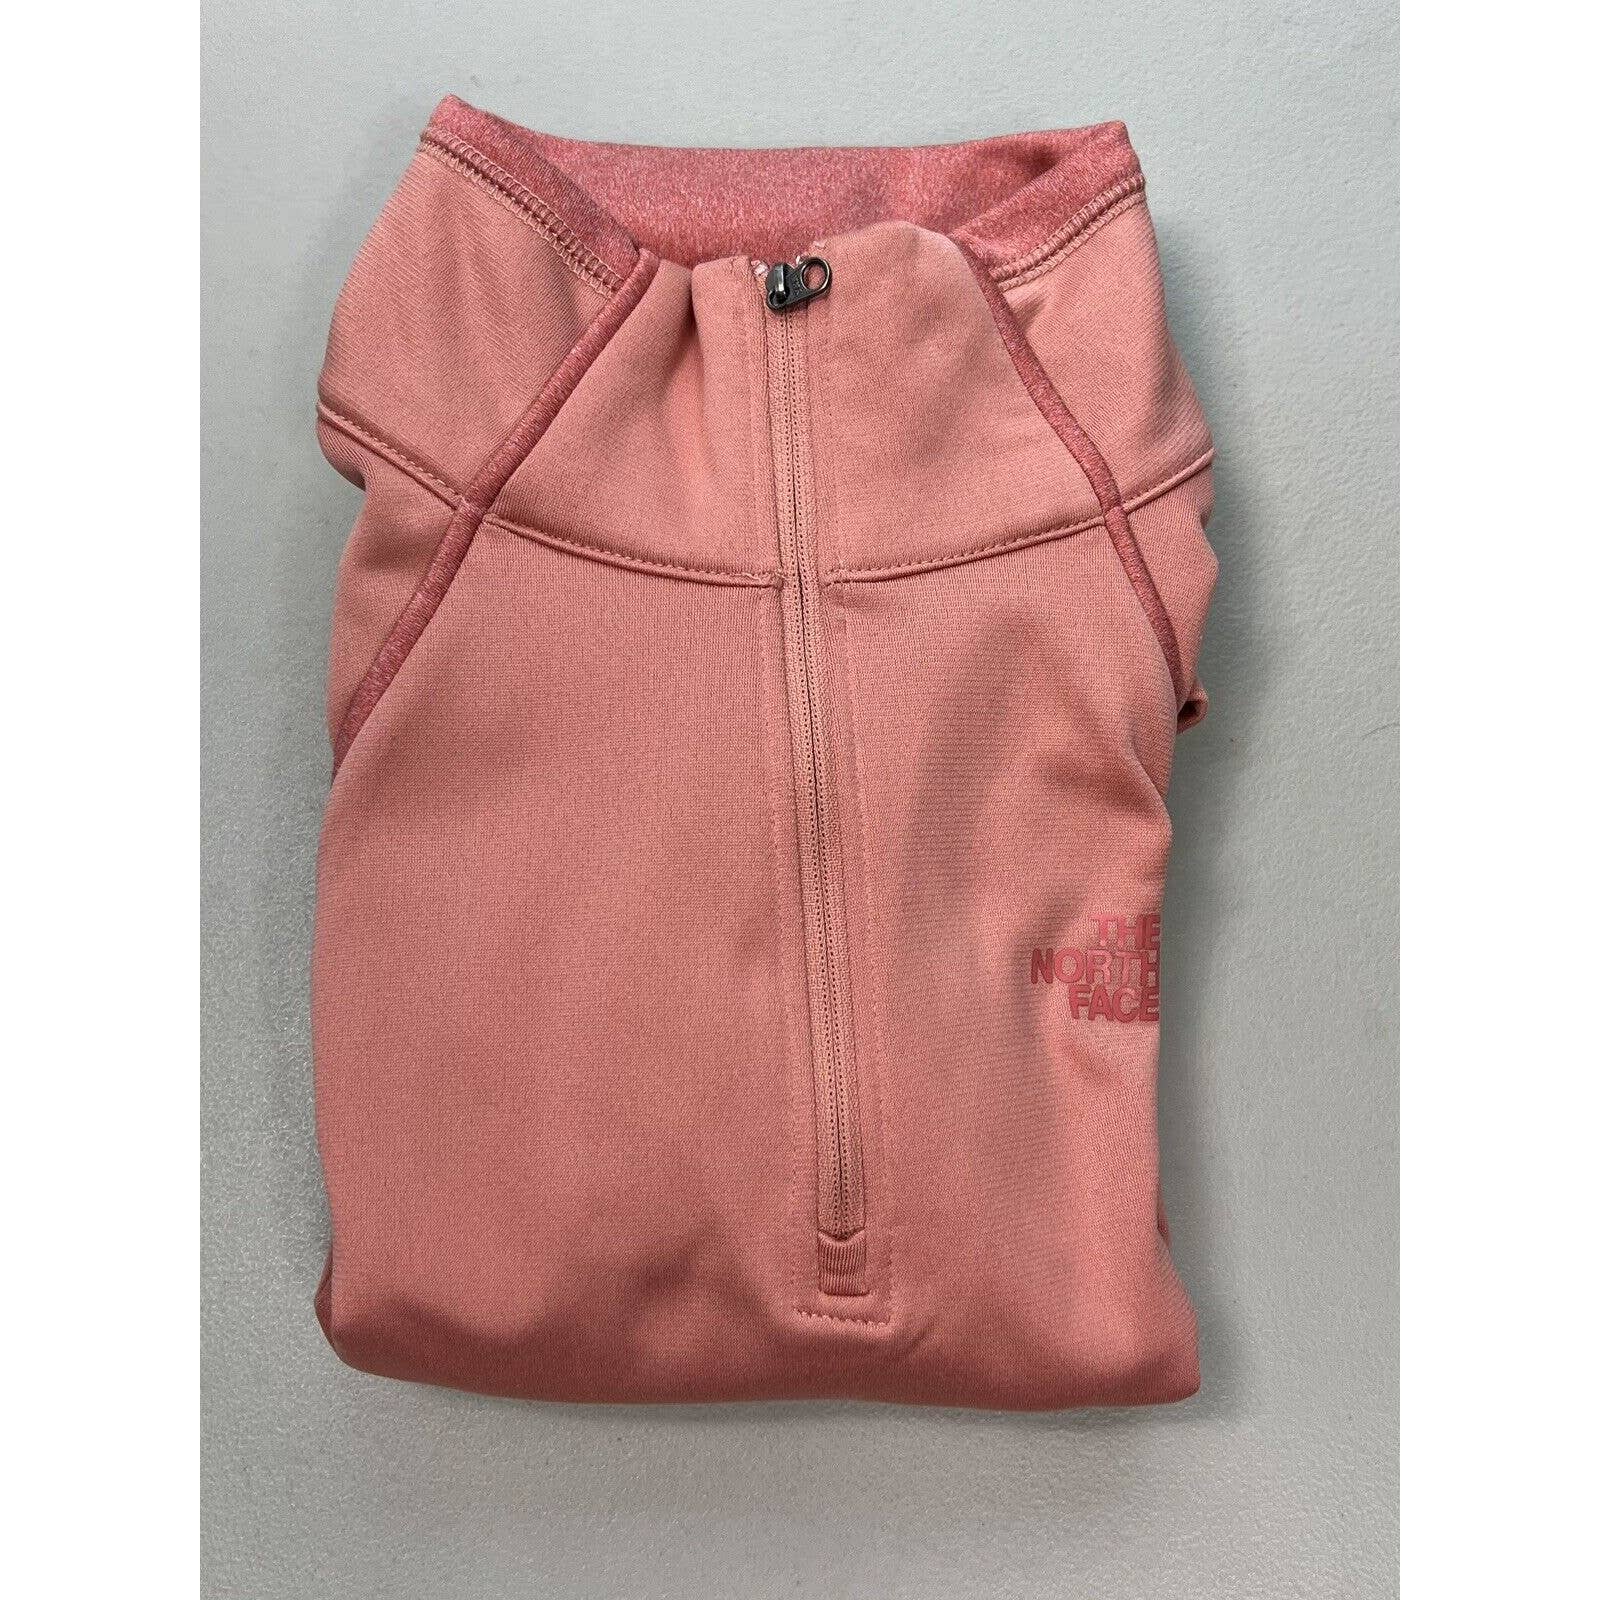 The North Face 1/4 Zip Softshell Pullover Women's Small 2-Toned Salmon Pink